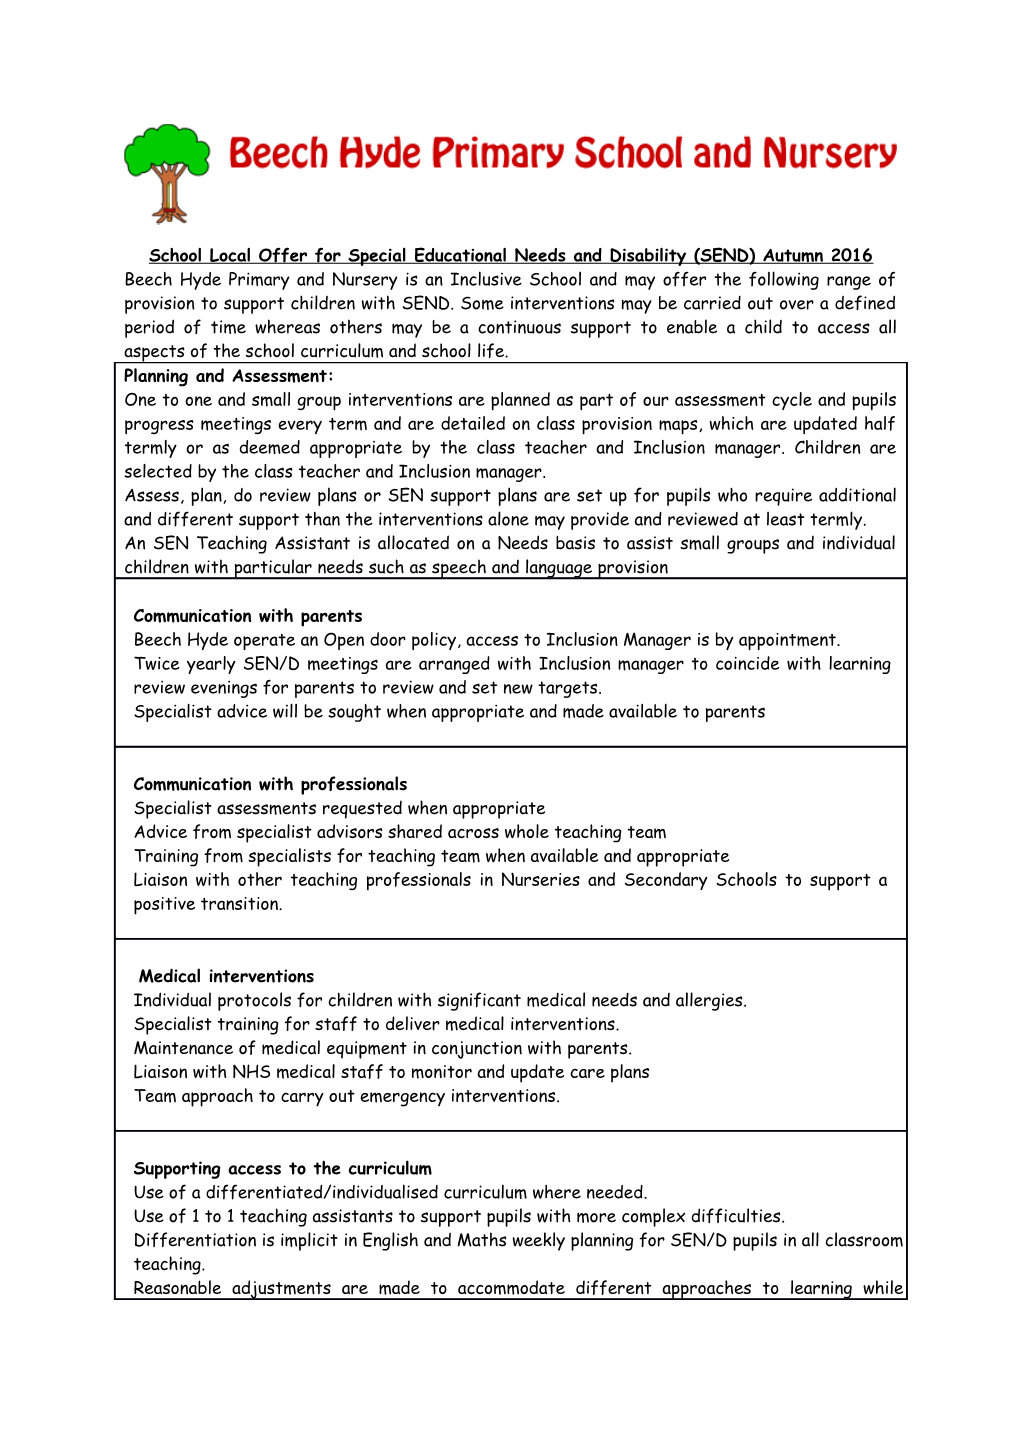 School Local Offer for Special Educational Needs and Disability (SEND)Autumn 2016